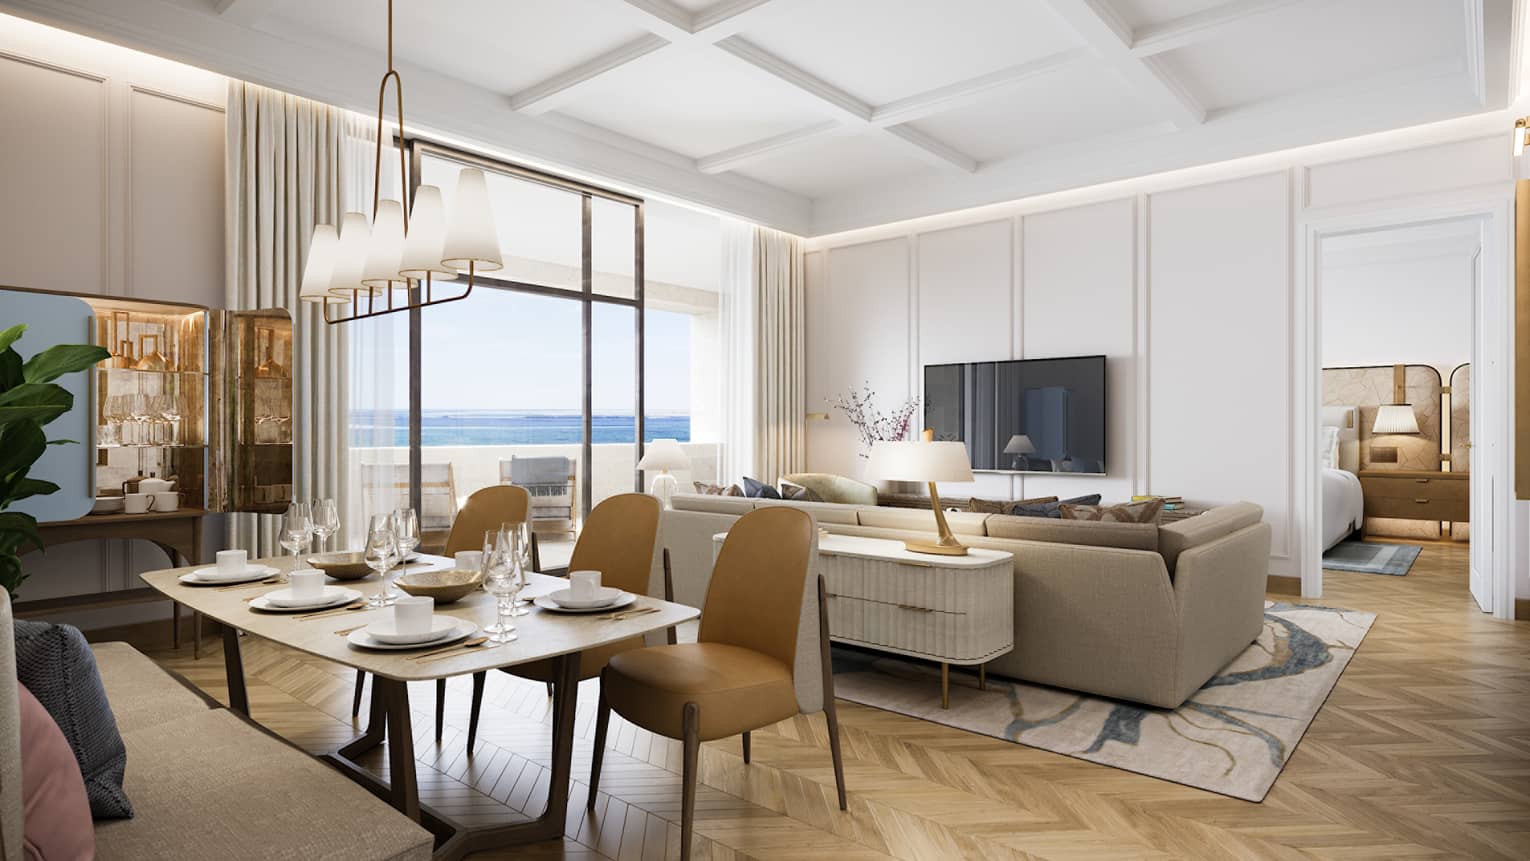 Large living and dining area with floor-to-ceiling windows and walkout to the beach.